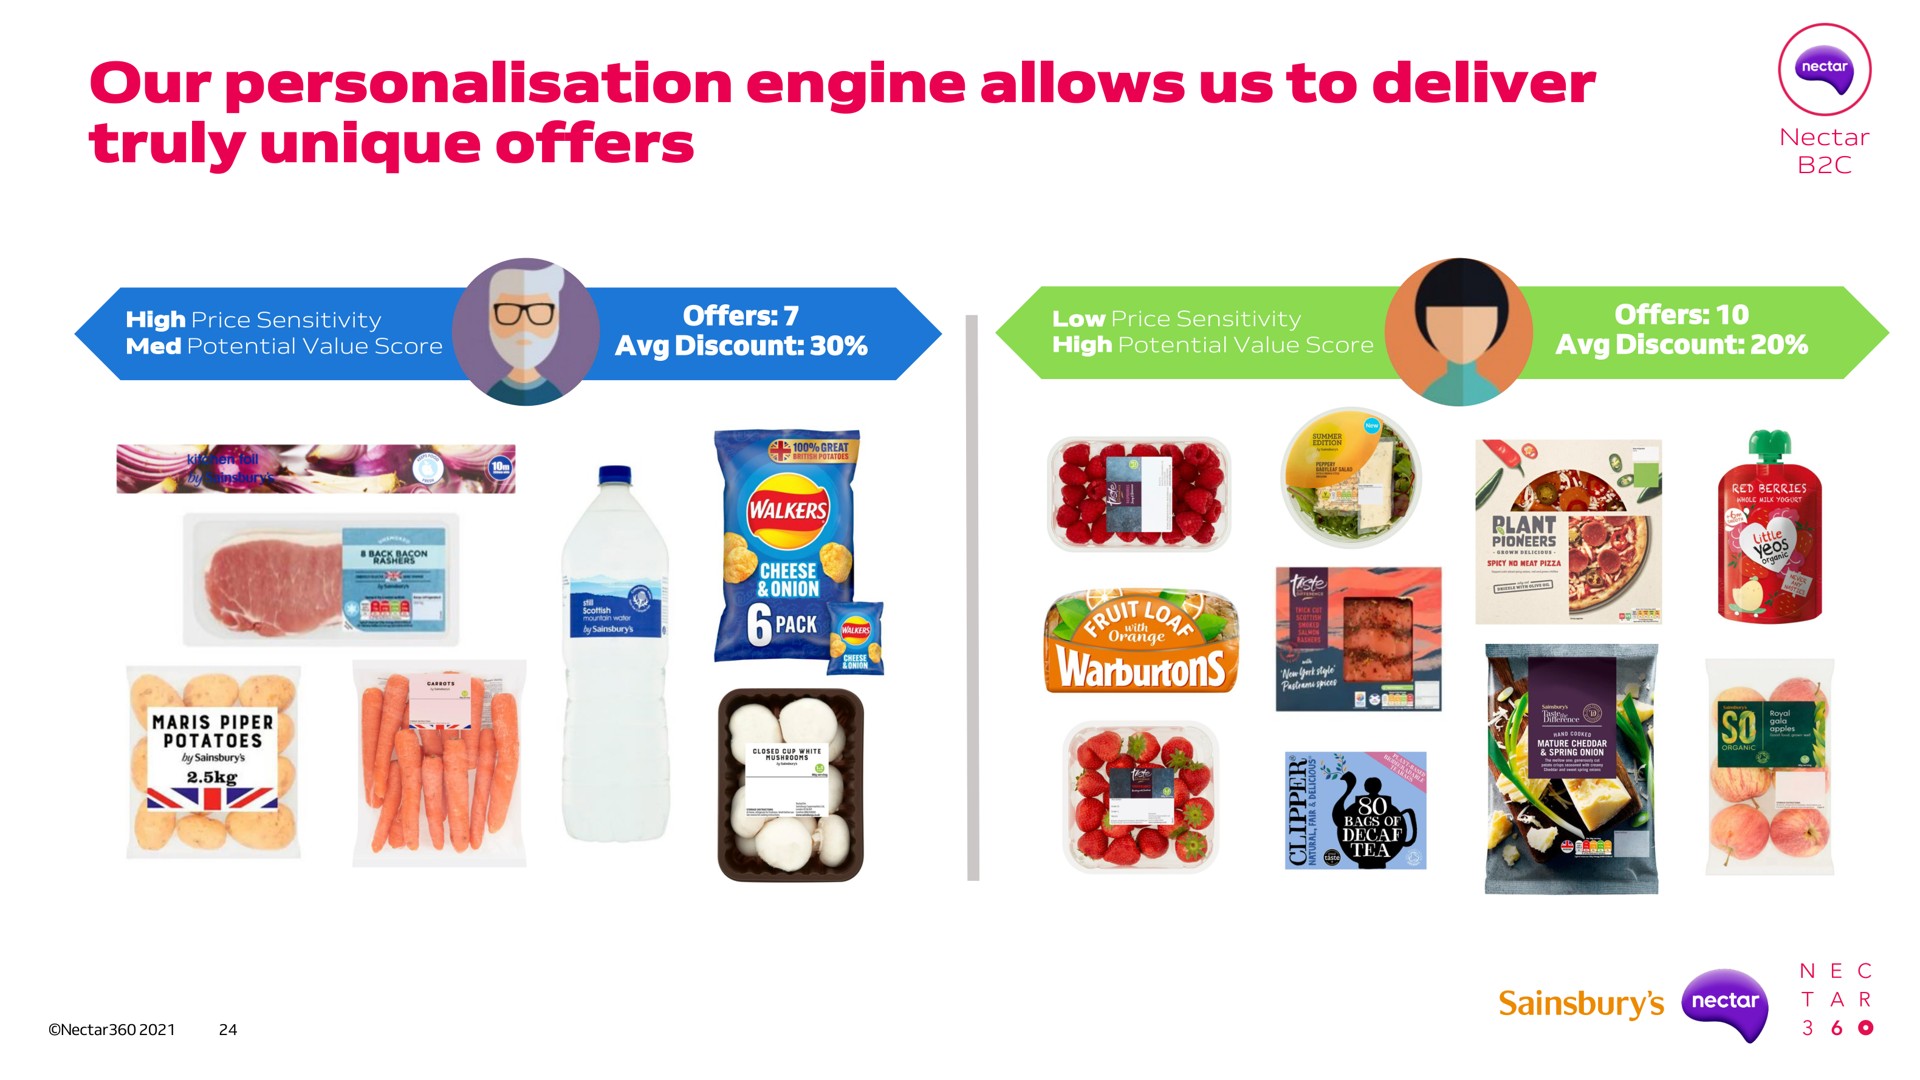 our engine allows us to deliver truly unique offers | Sainsbury's